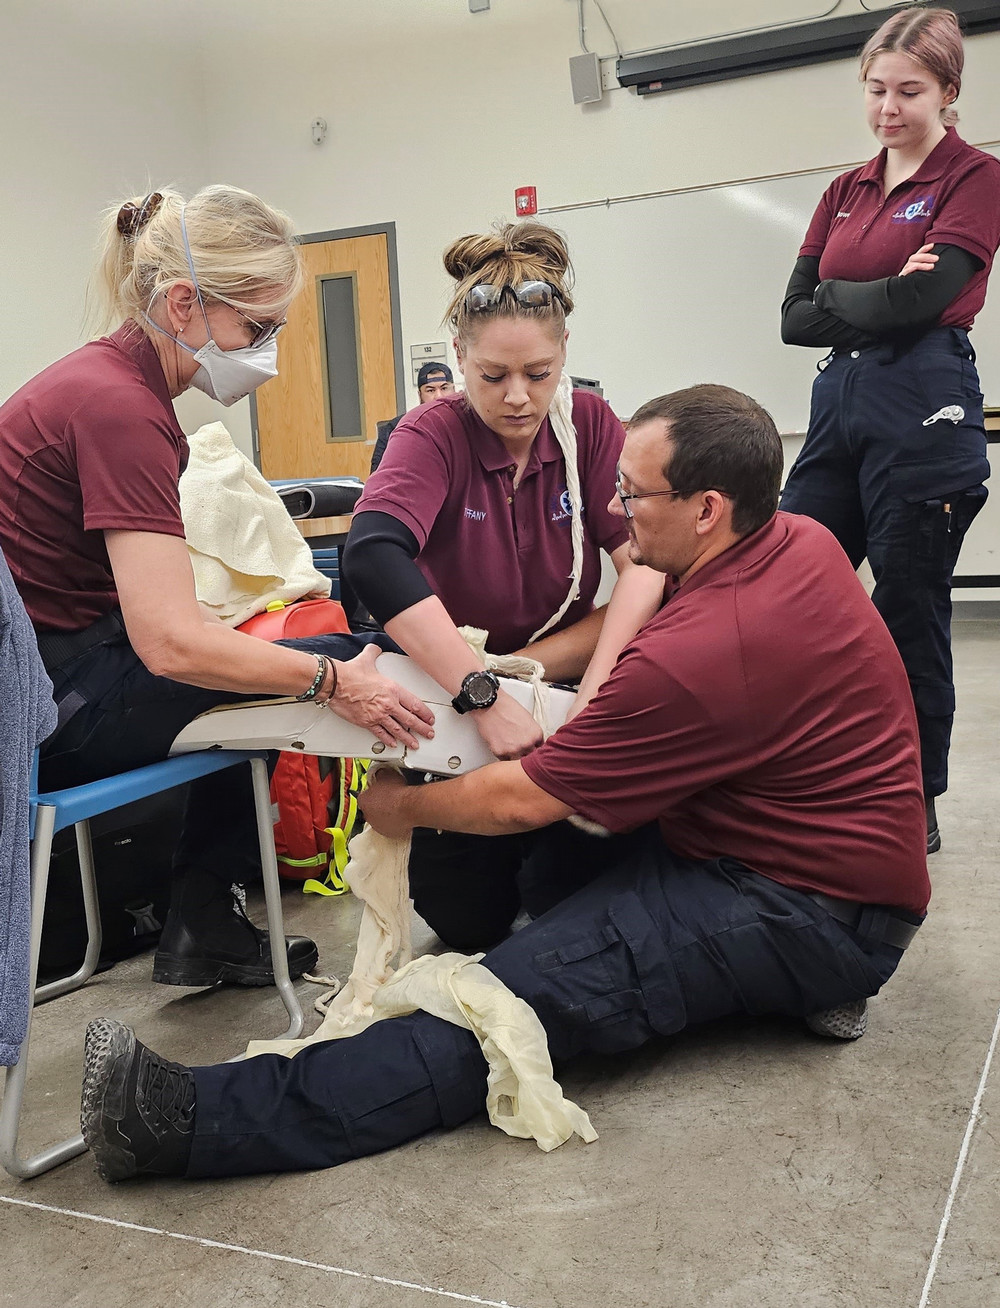 Trainees in EMS practice setting up a leg splint under instructor supervision.